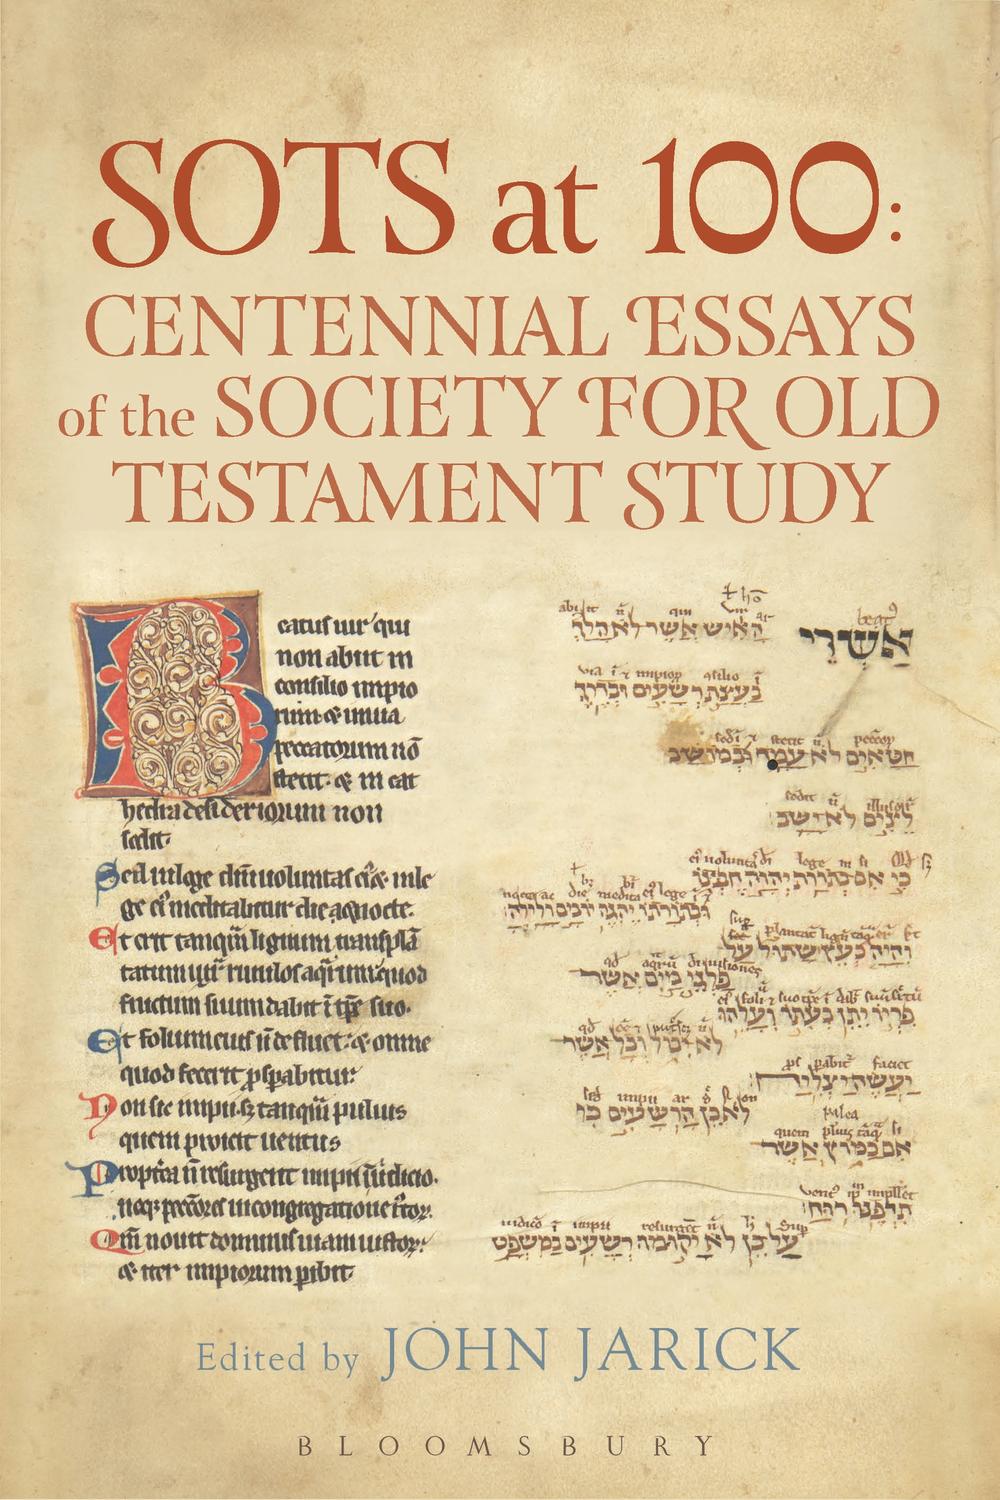 SOTS at 100: Centennial Essays of the Society for Old Testament Study - John Jarick